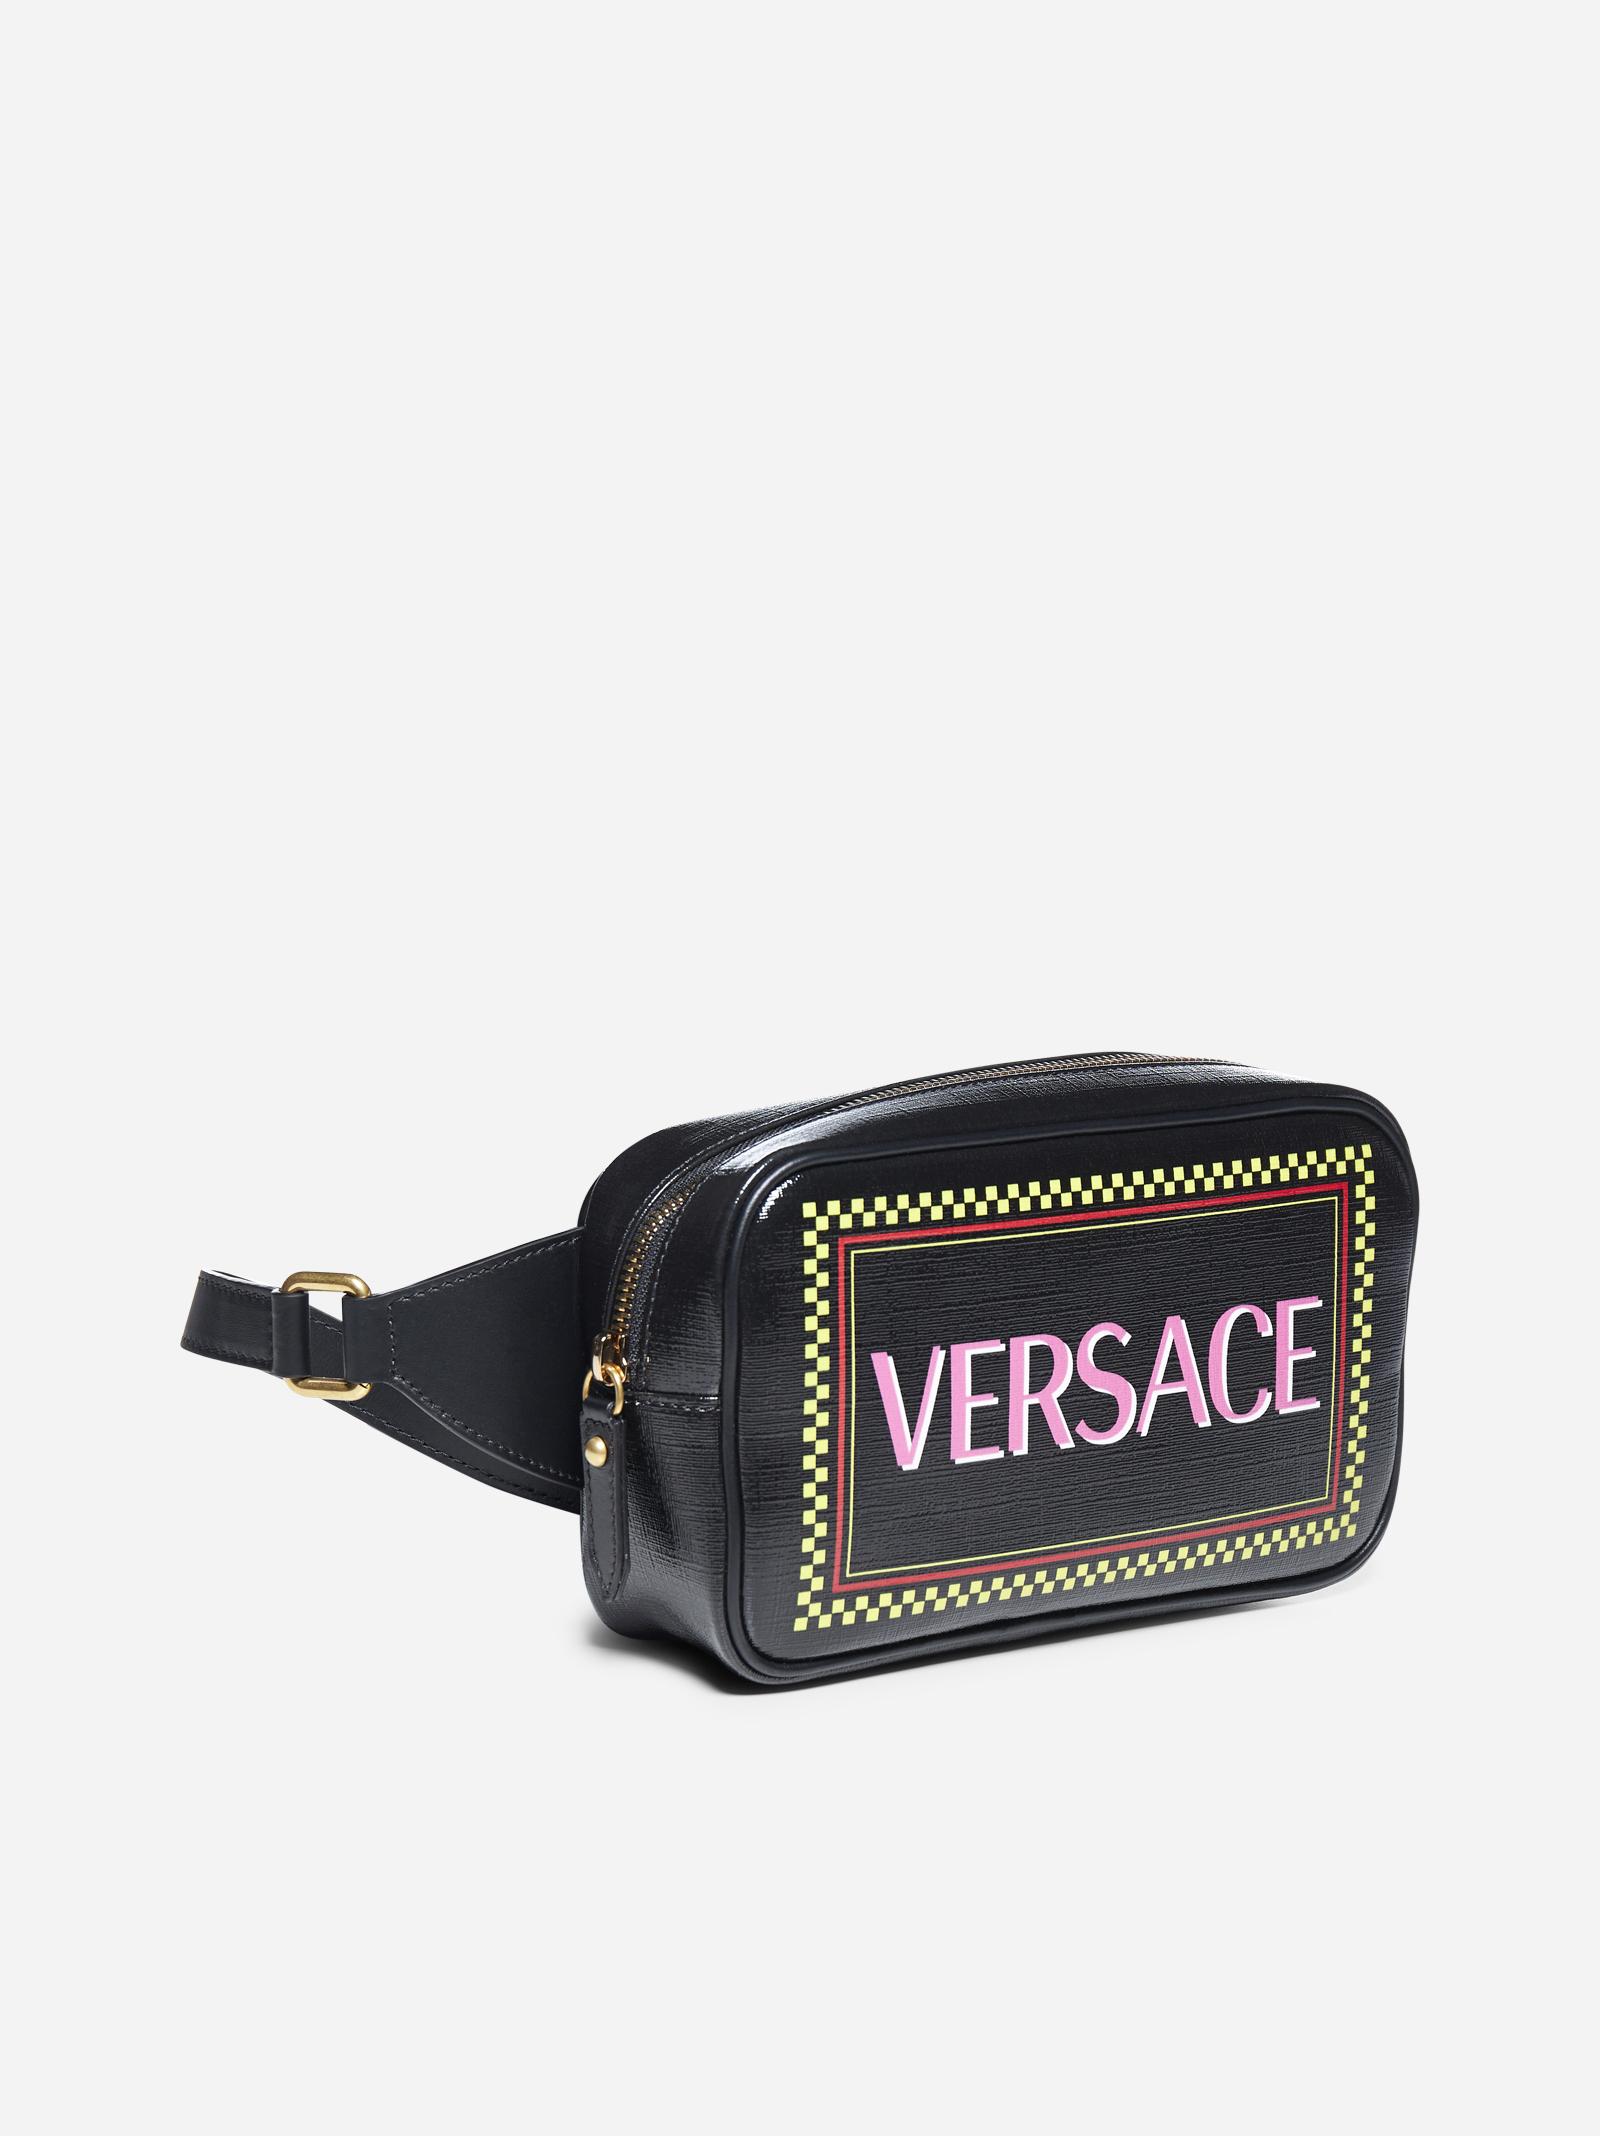 Versace Logo Canvas Fanny Pack in Black | Lyst